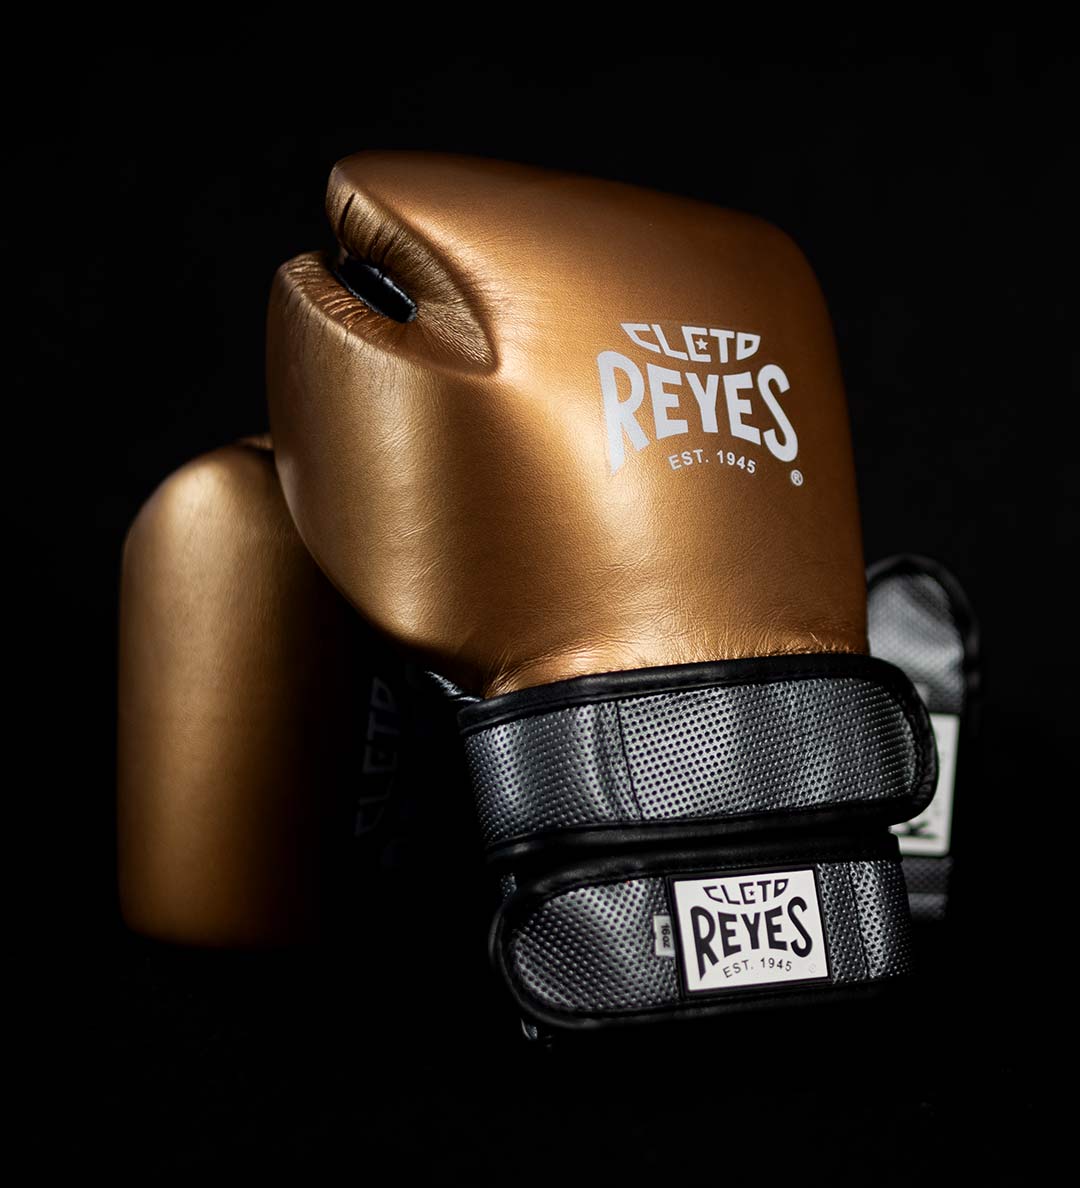 The new Cleto Reyes Hero Double Loop Boxing Gloves